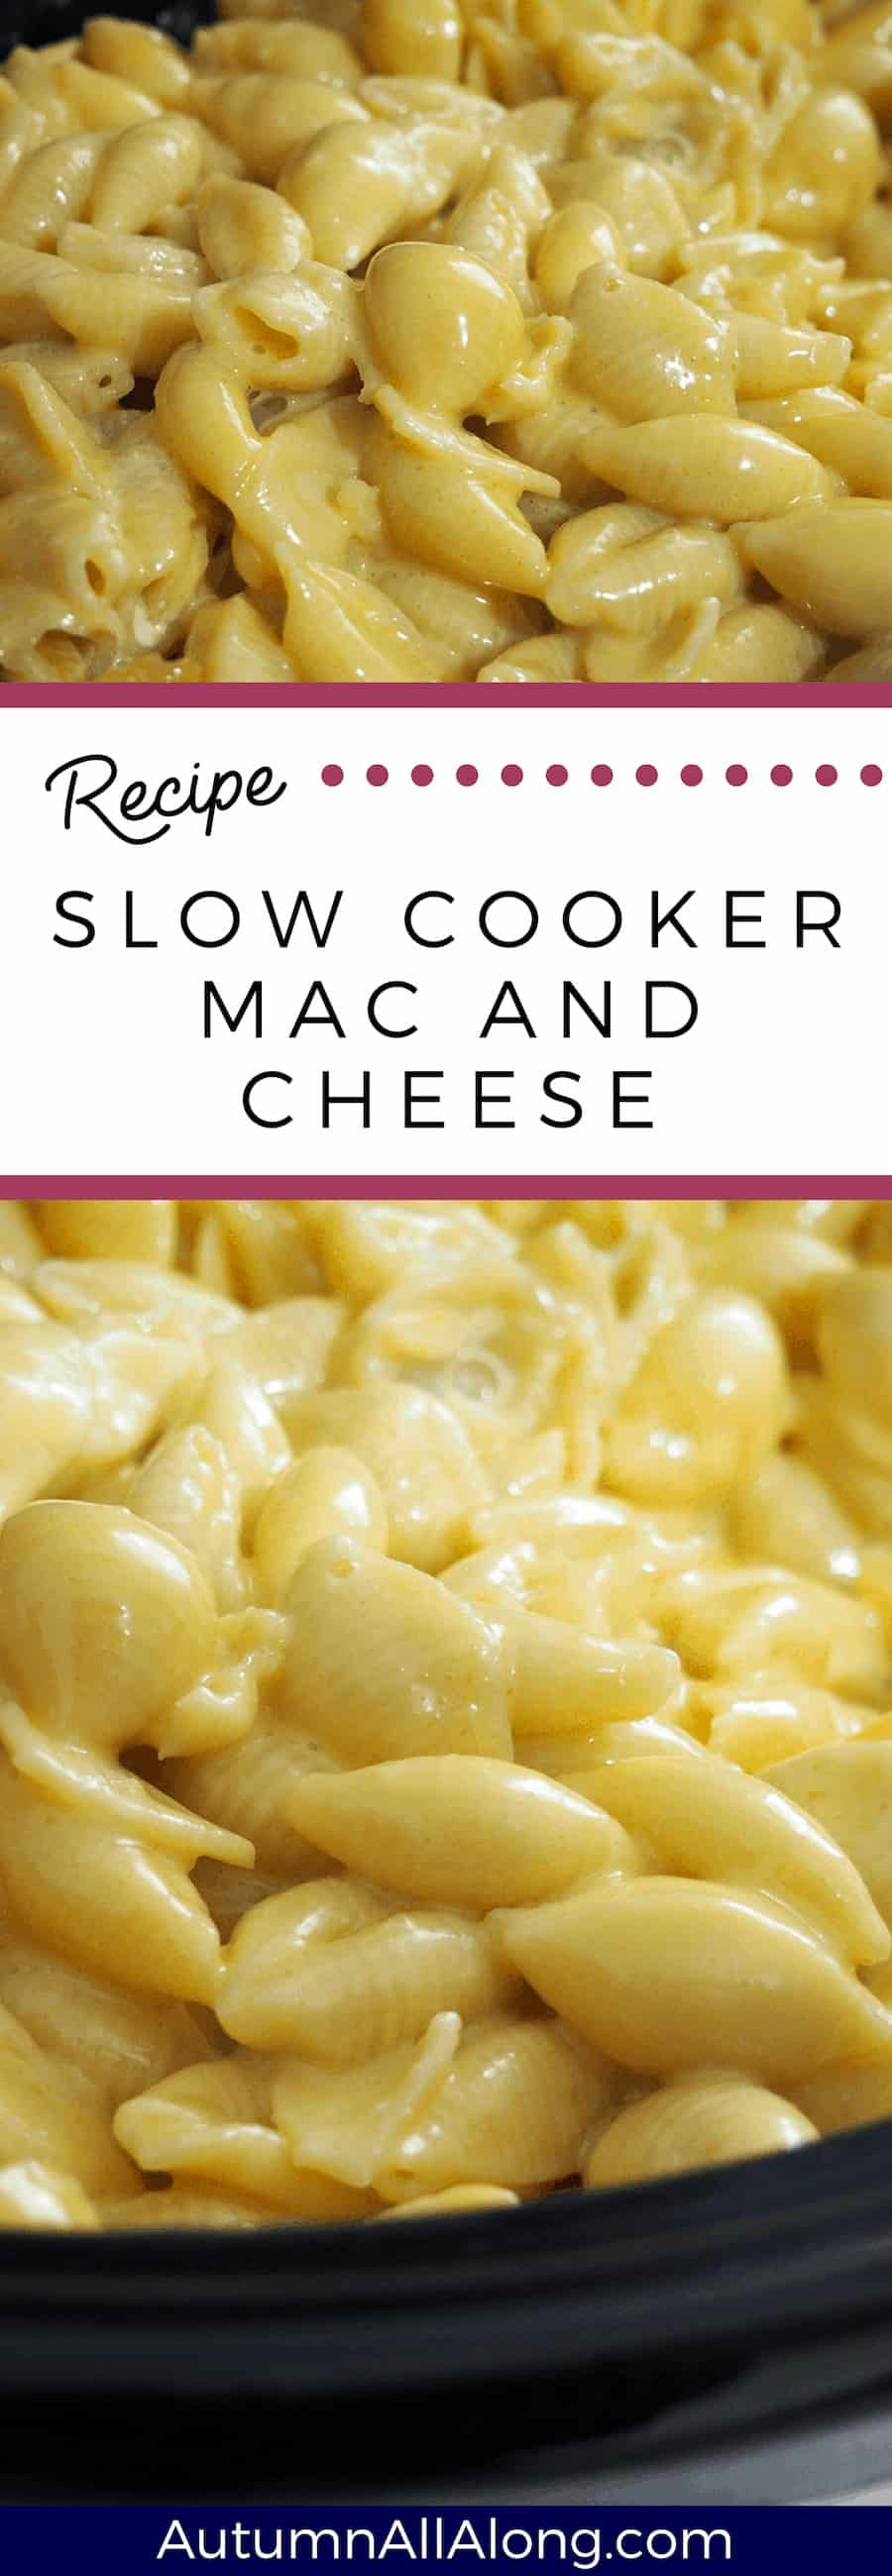 This slow cooker mac and cheese recipe is mouth watering and so easy to make! If you have two hours to spare, then this recipe is already finished! | via Autumn All Along